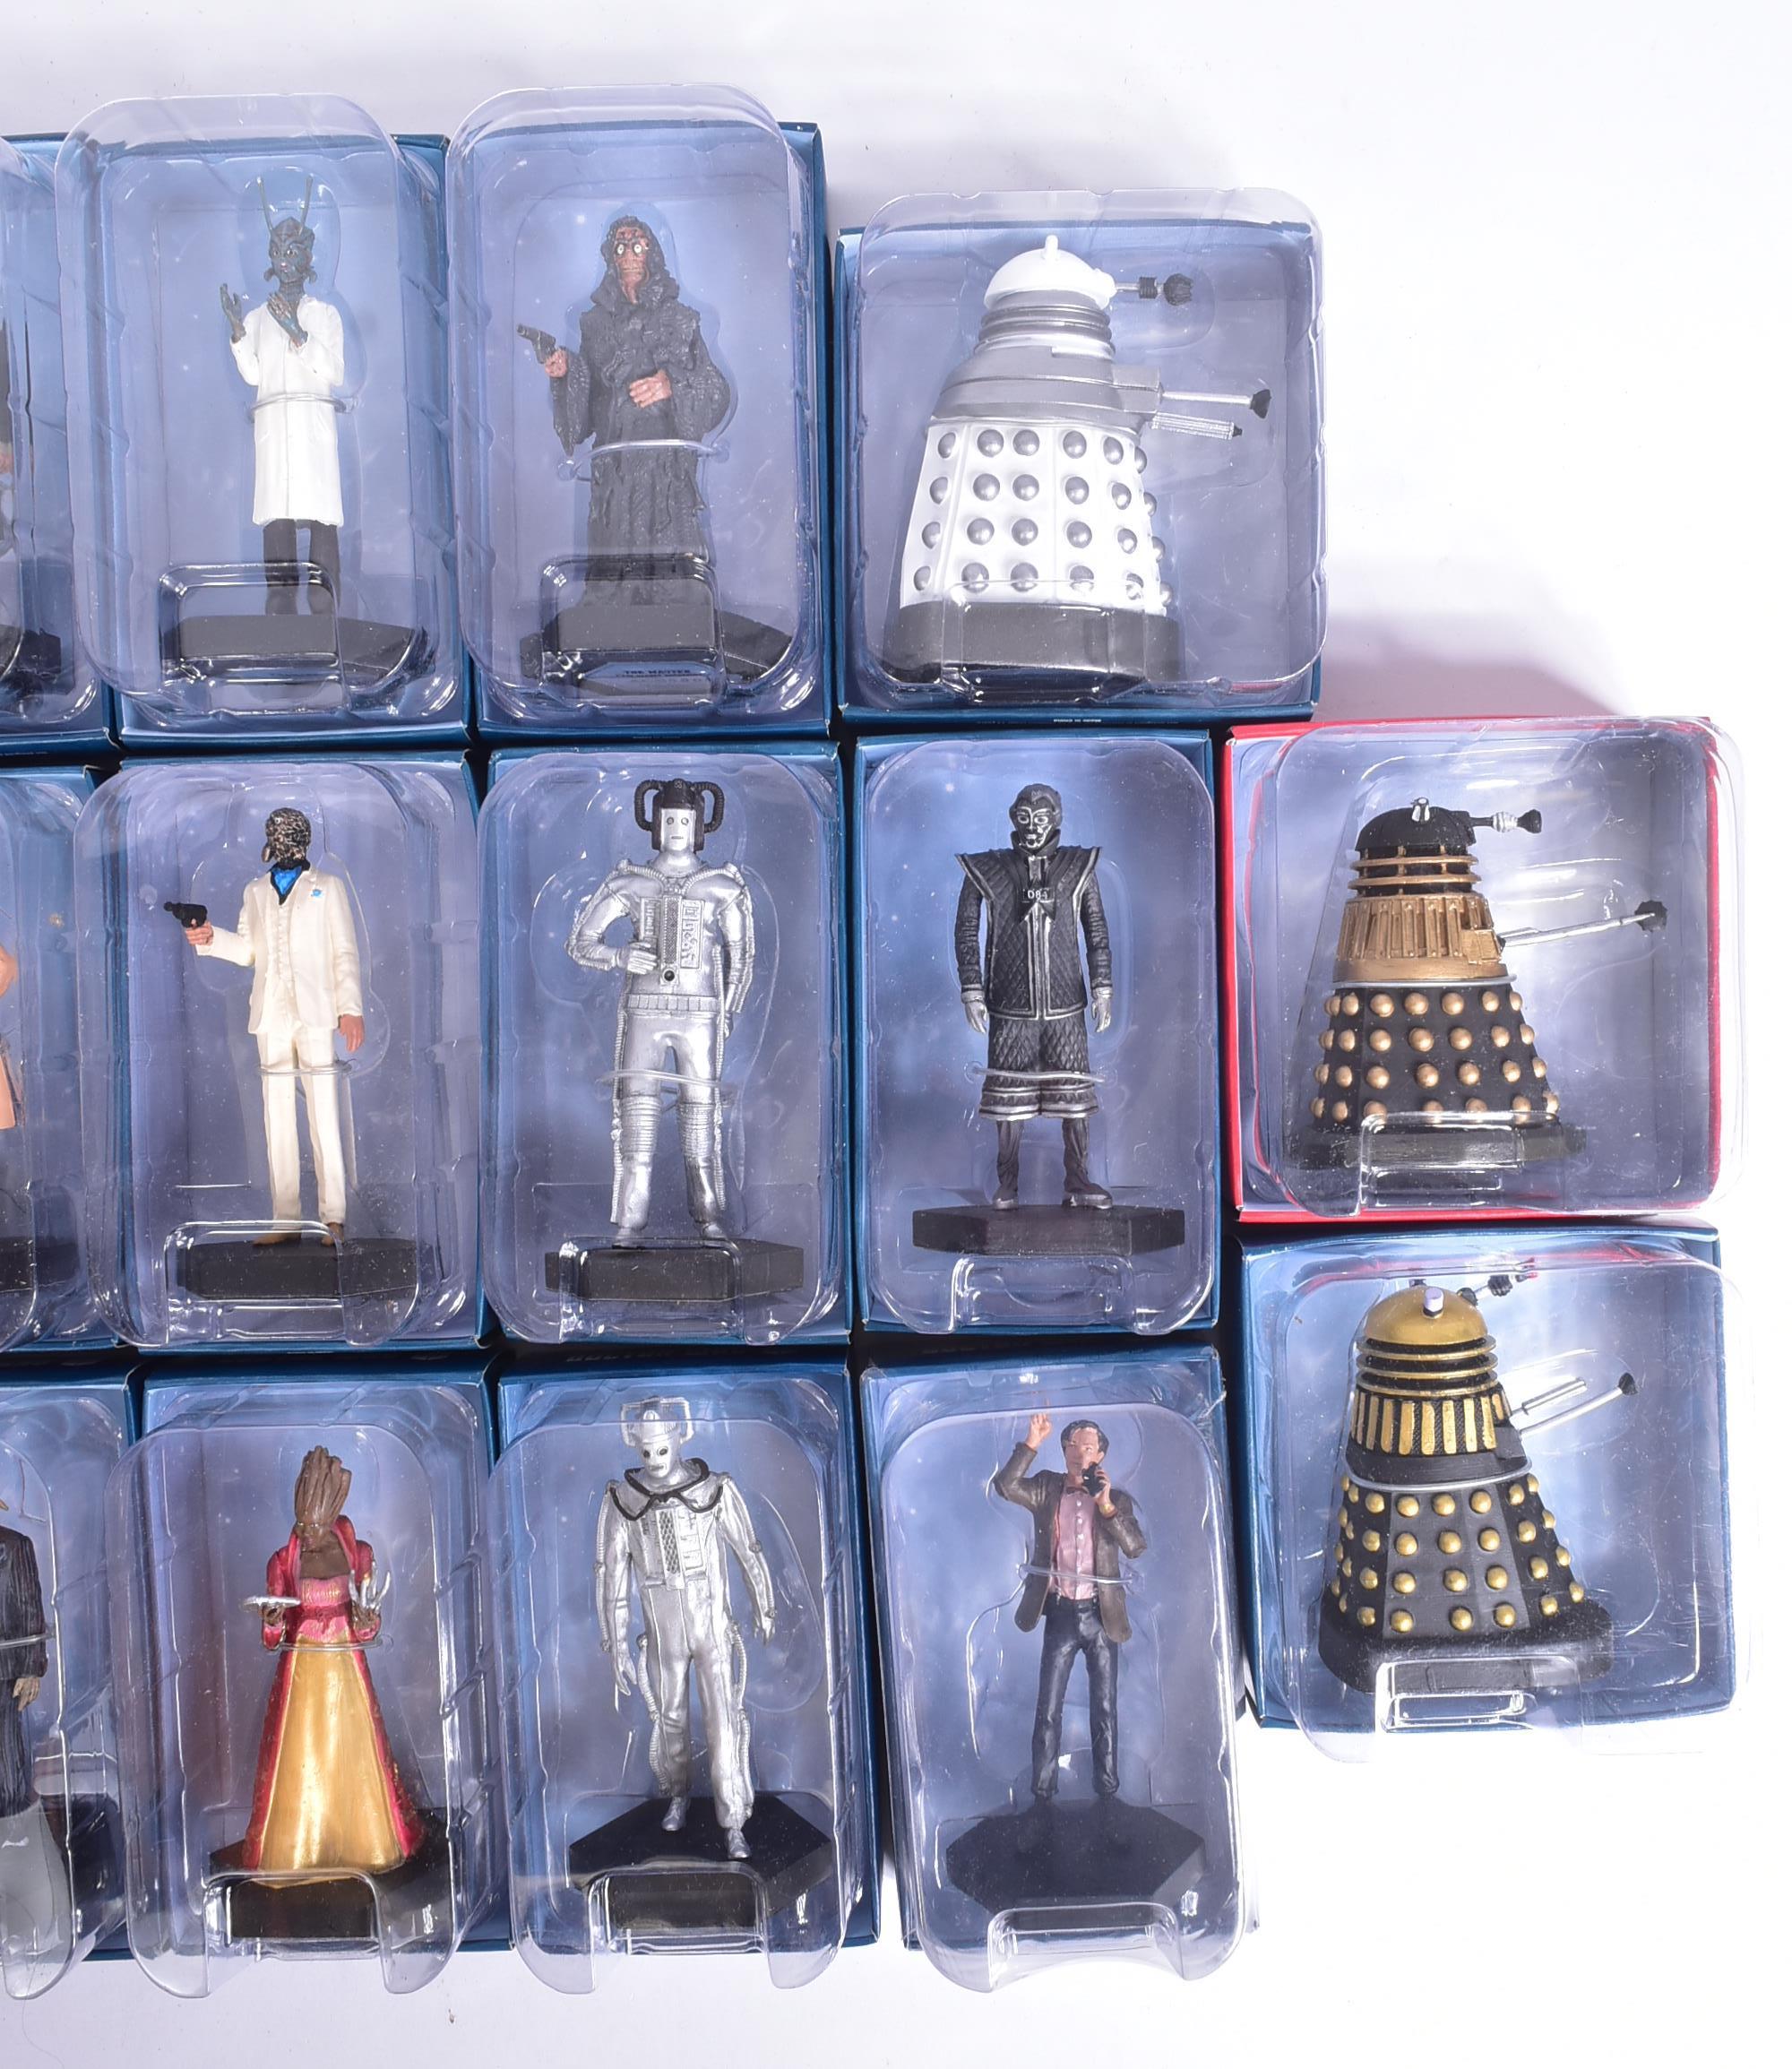 DOCTOR WHO - EAGLEMOSS - RESIN DIECAST FIGURINES - Image 2 of 5